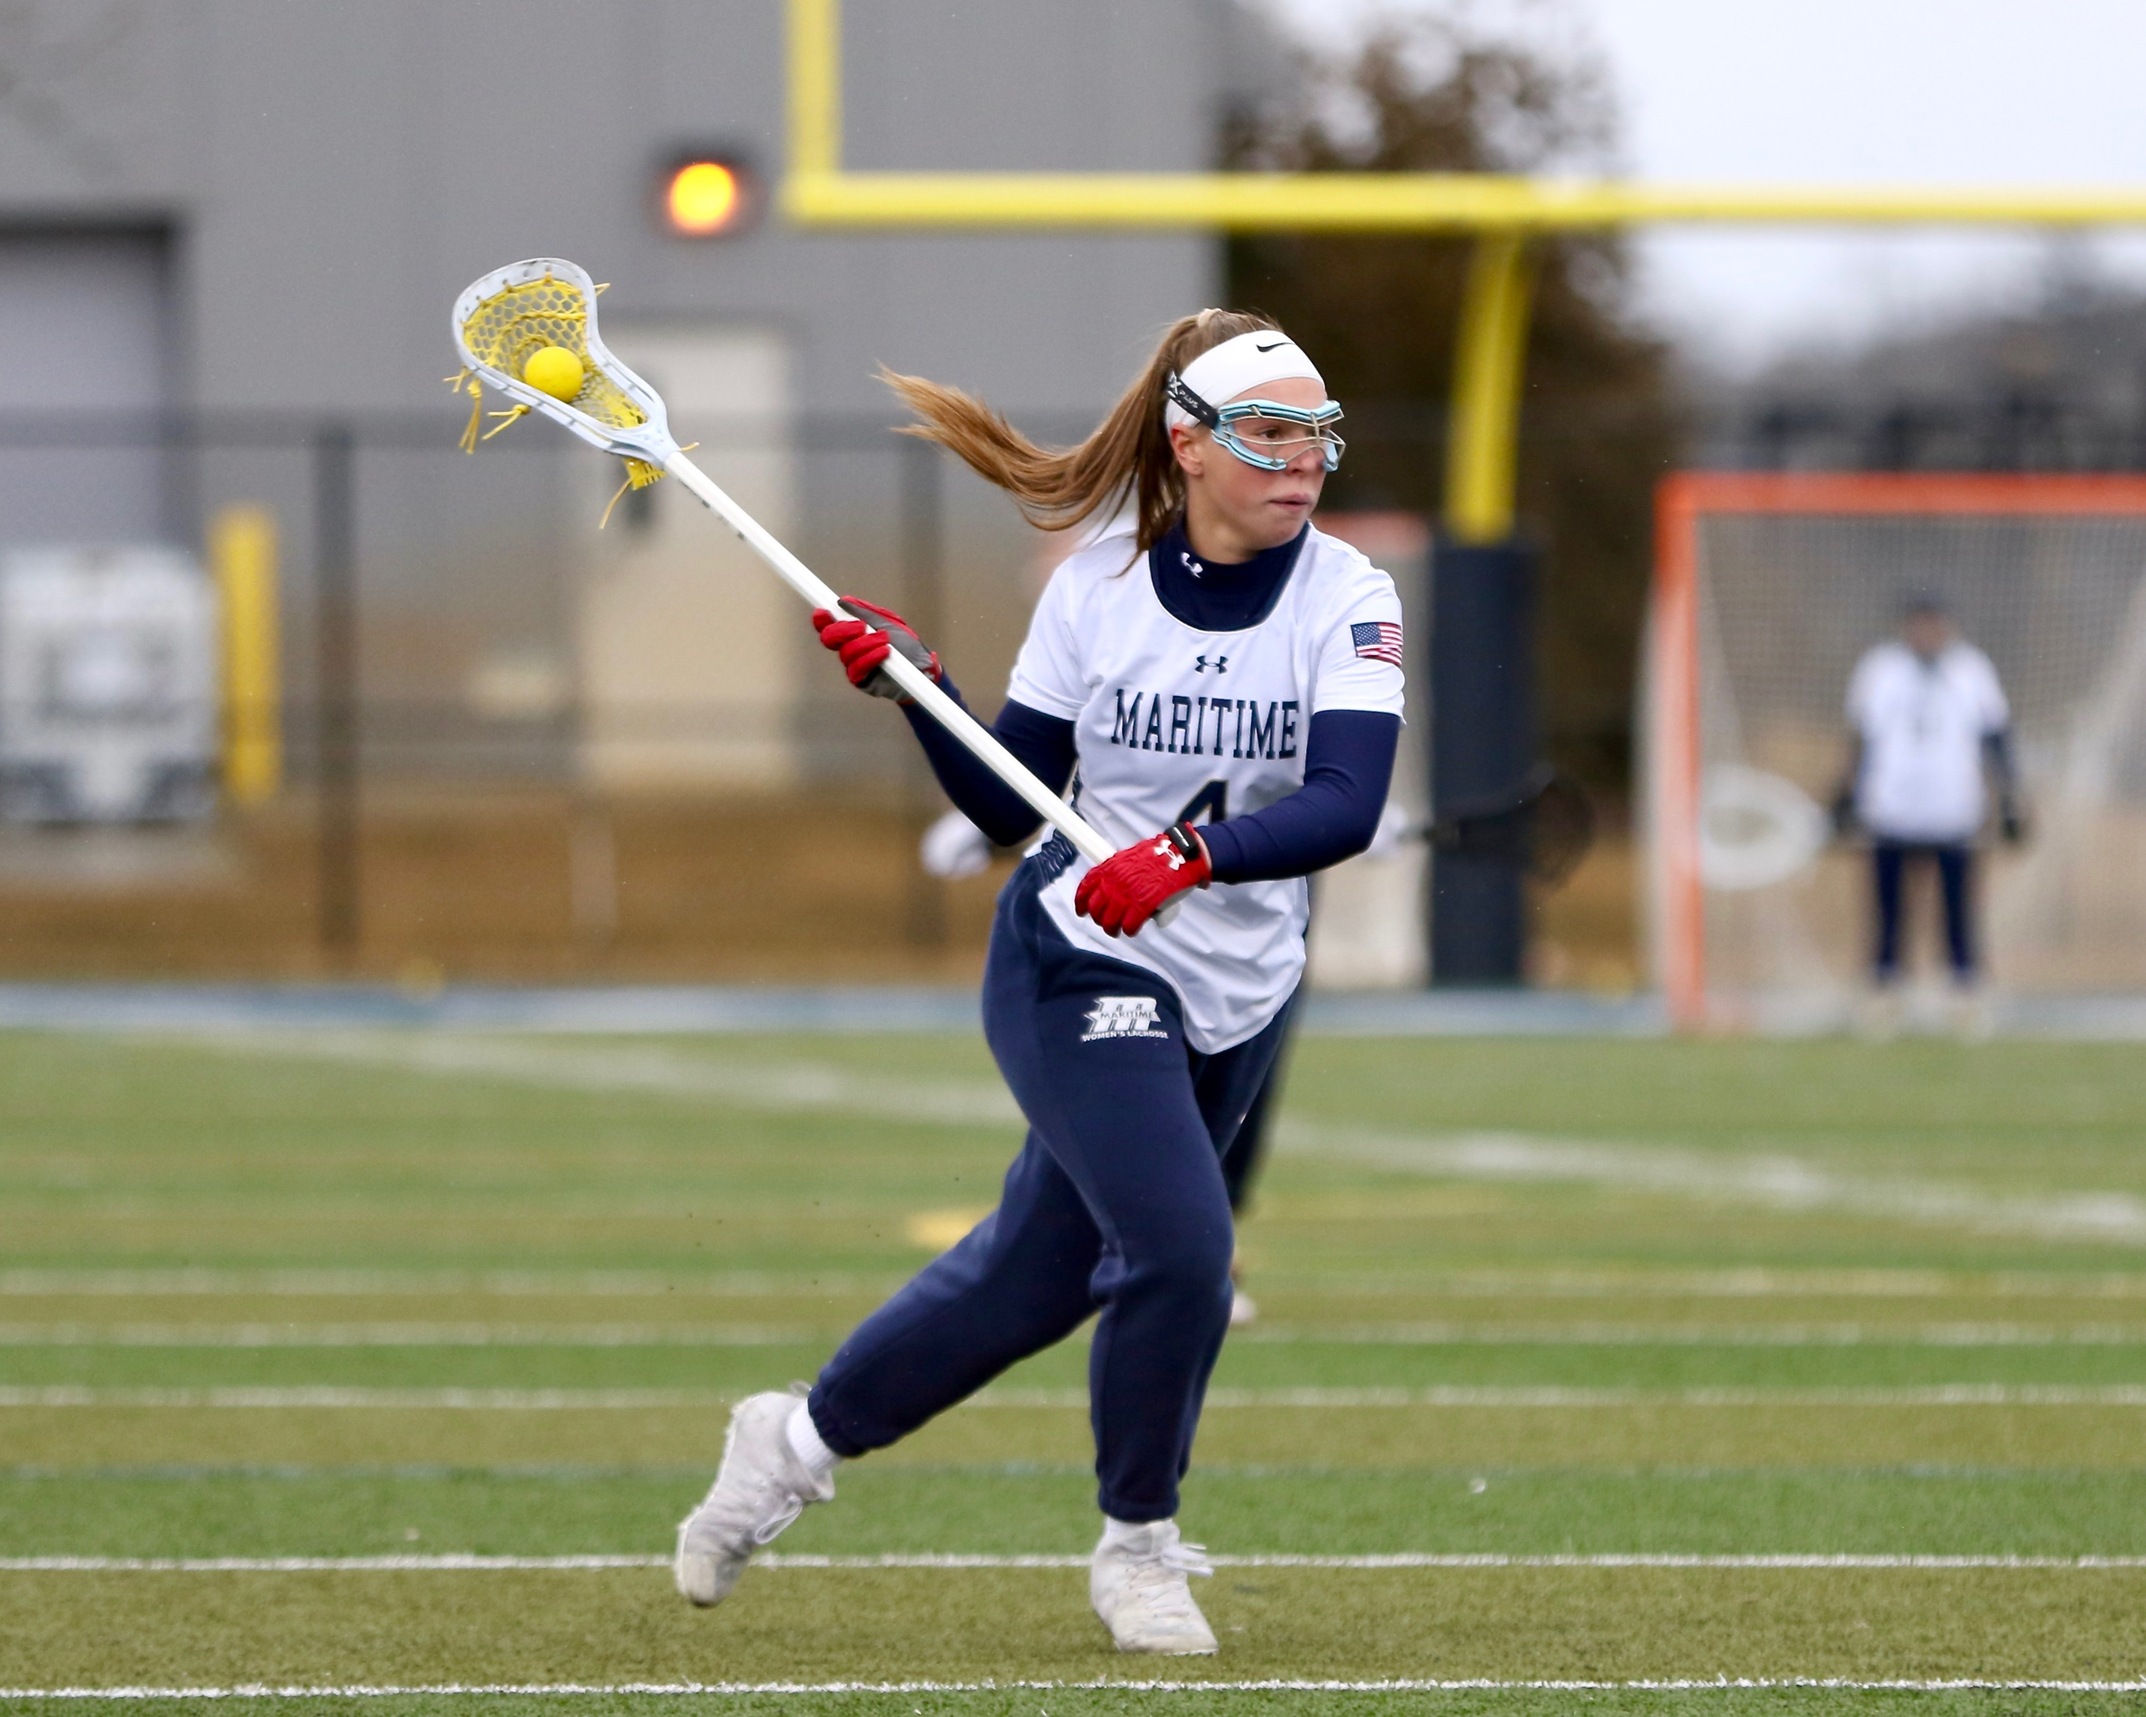 Llewellyn Reaches 100 Career Points in Loss to Lancers